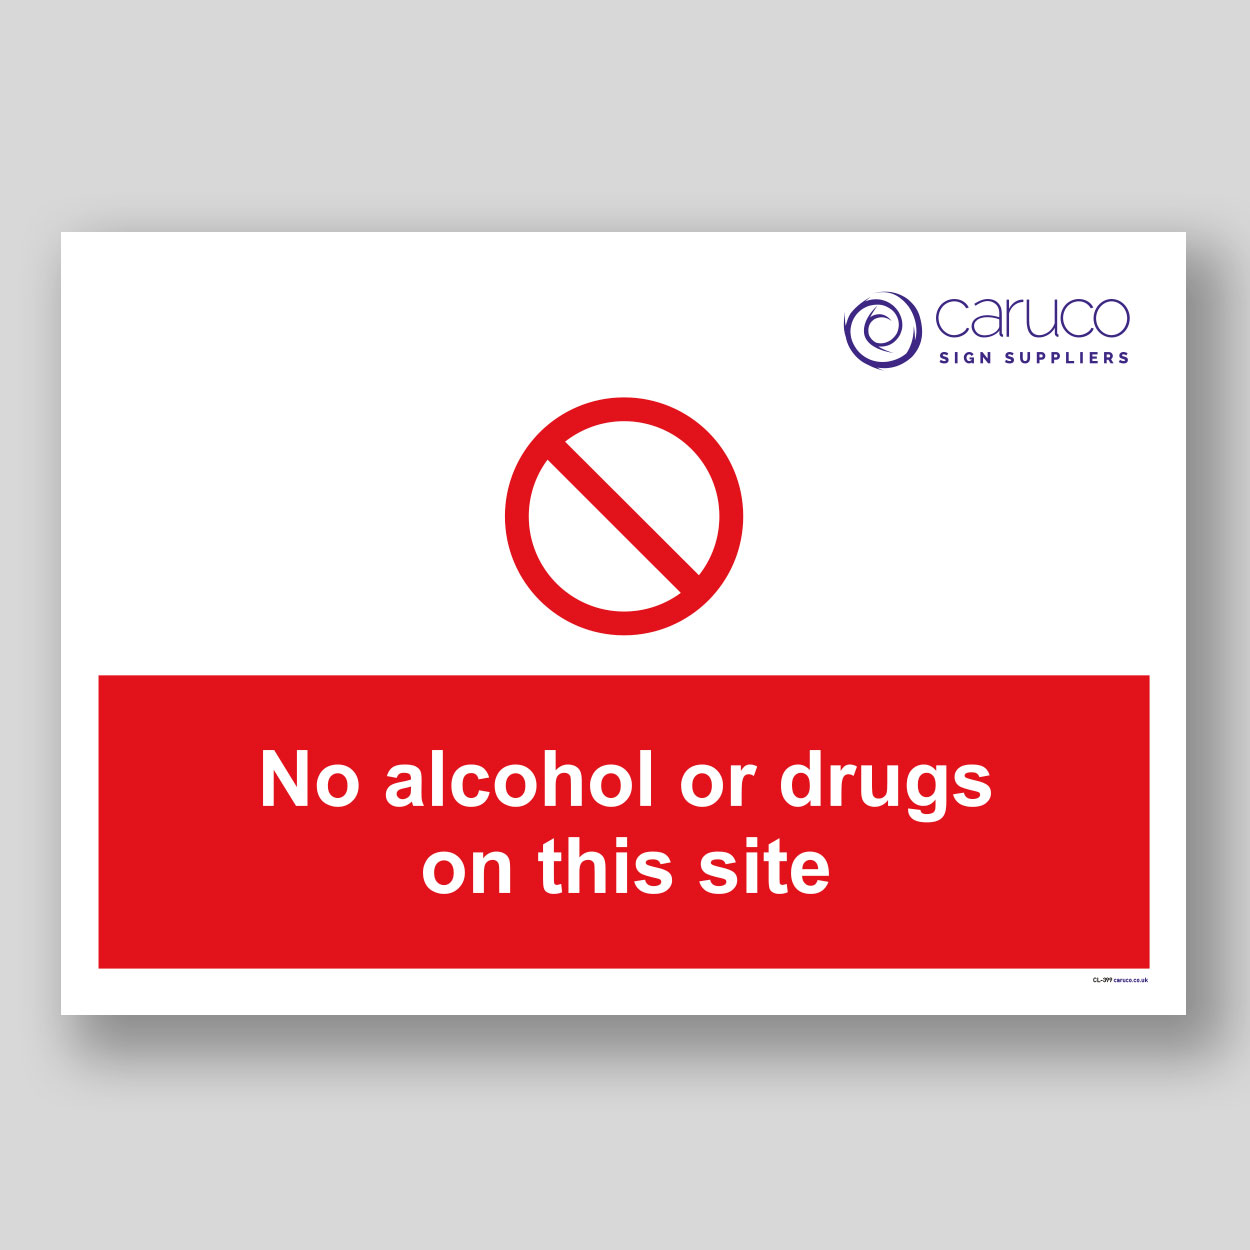 CL-399 No alcohol or drugs on site